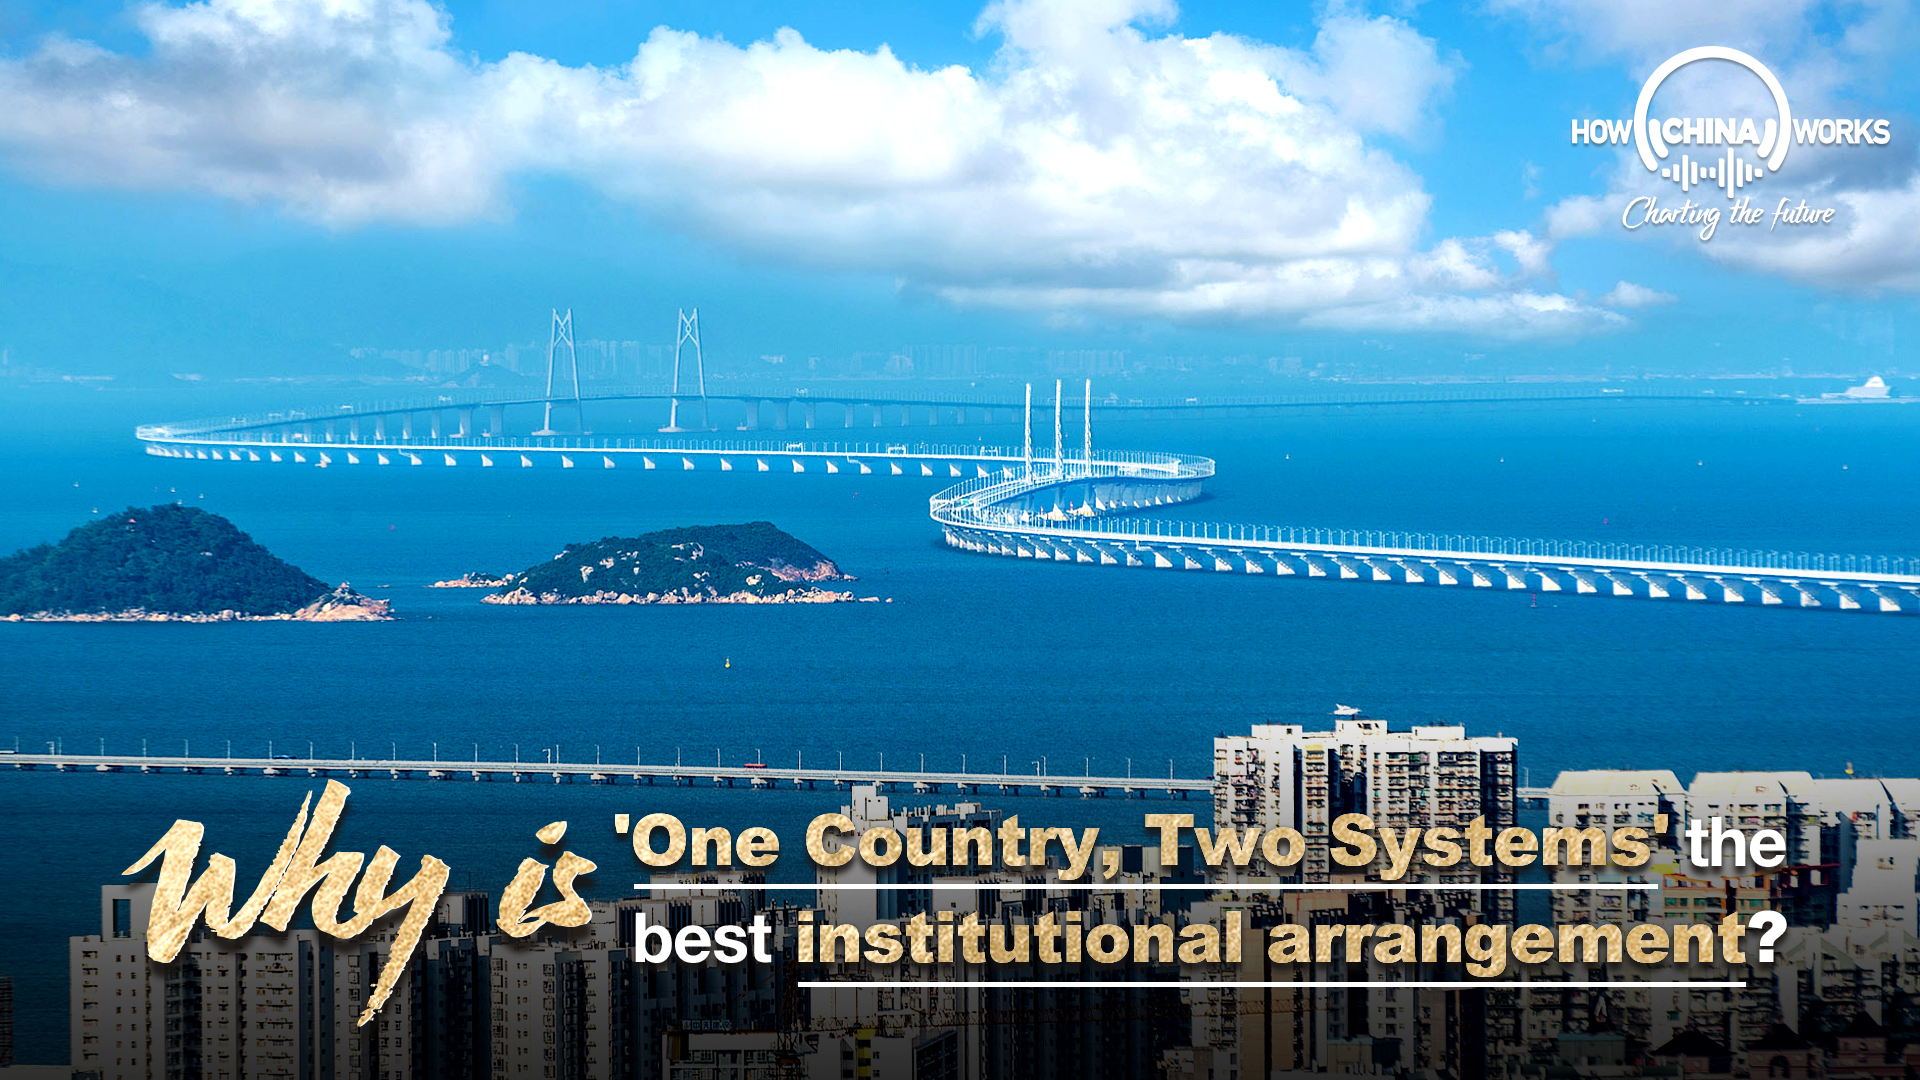 Why is 'One Country, Two Systems' the best institutional arrangement?